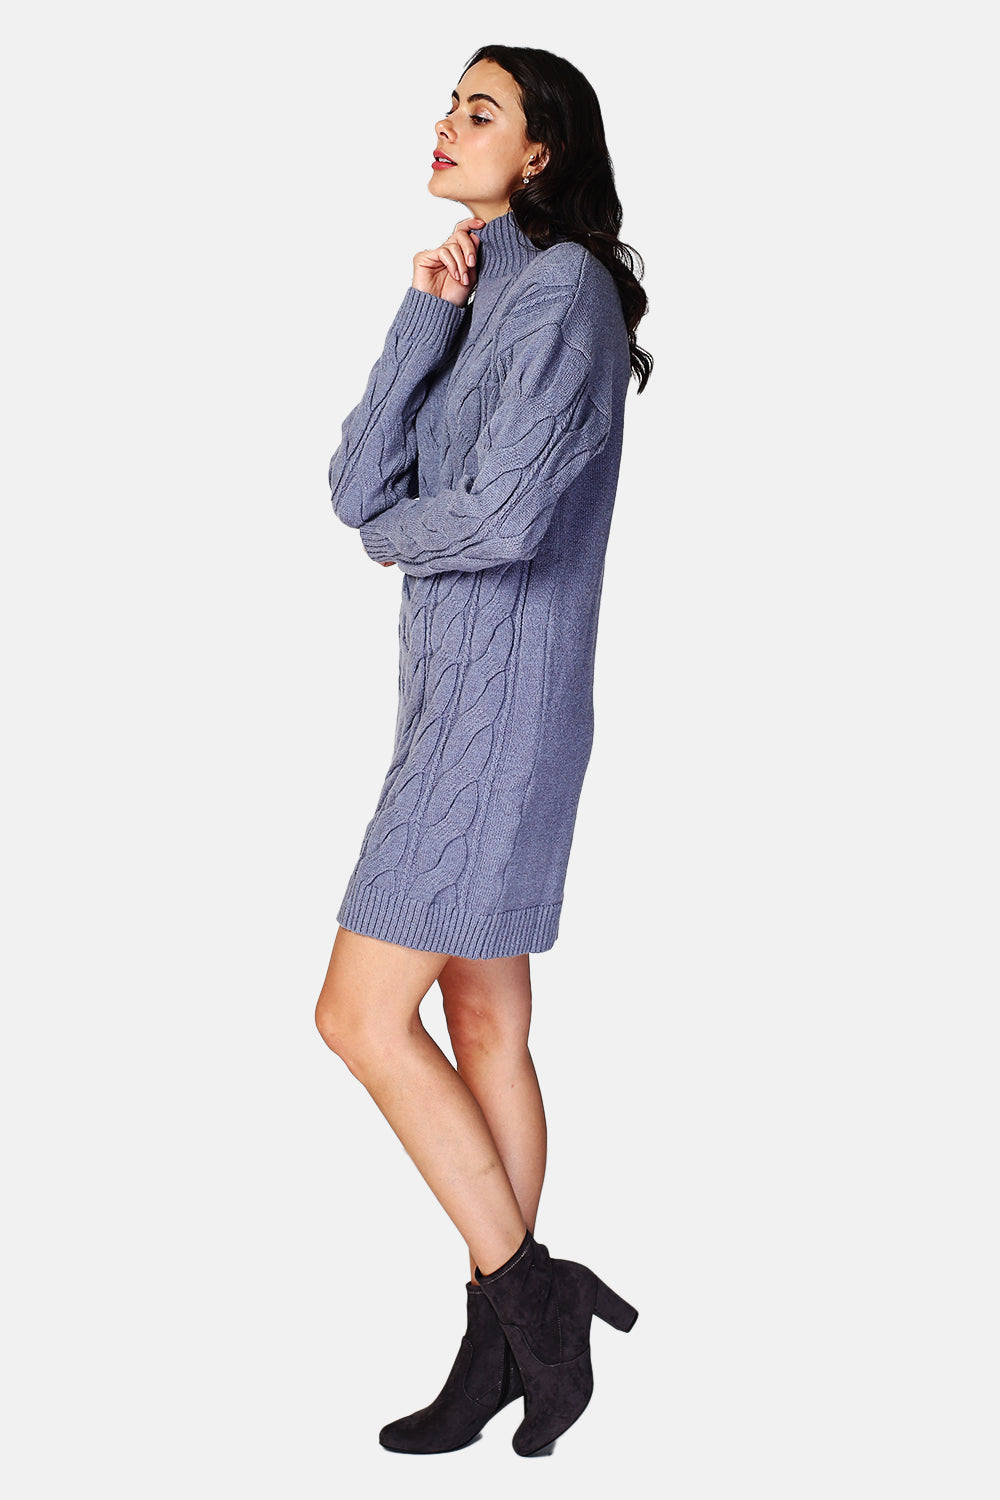 High neck dress, cable knit with long sleeves